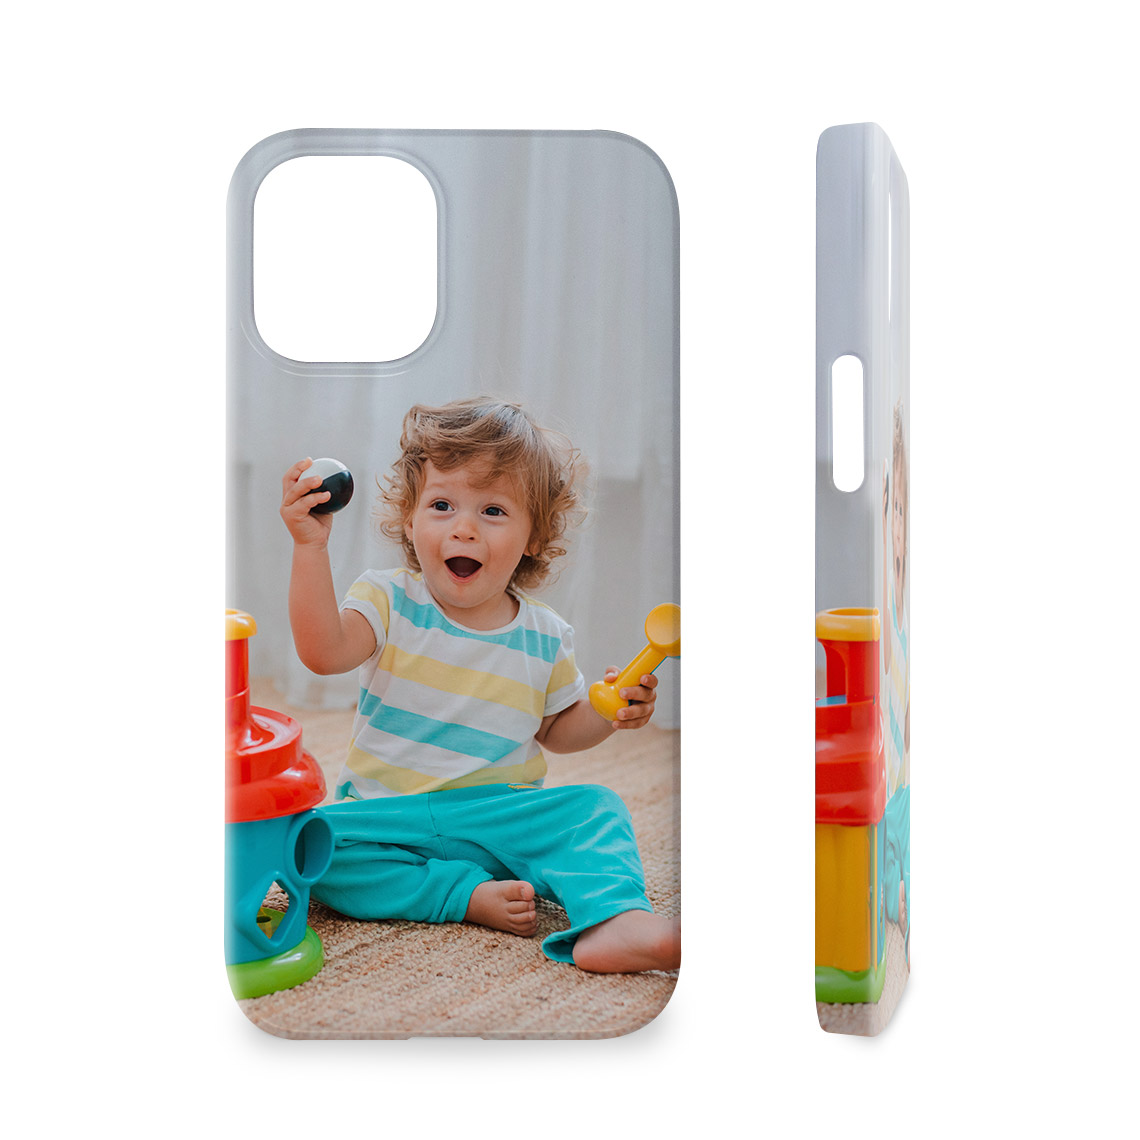 Personalised iPhone 12 Mini Cases & Covers